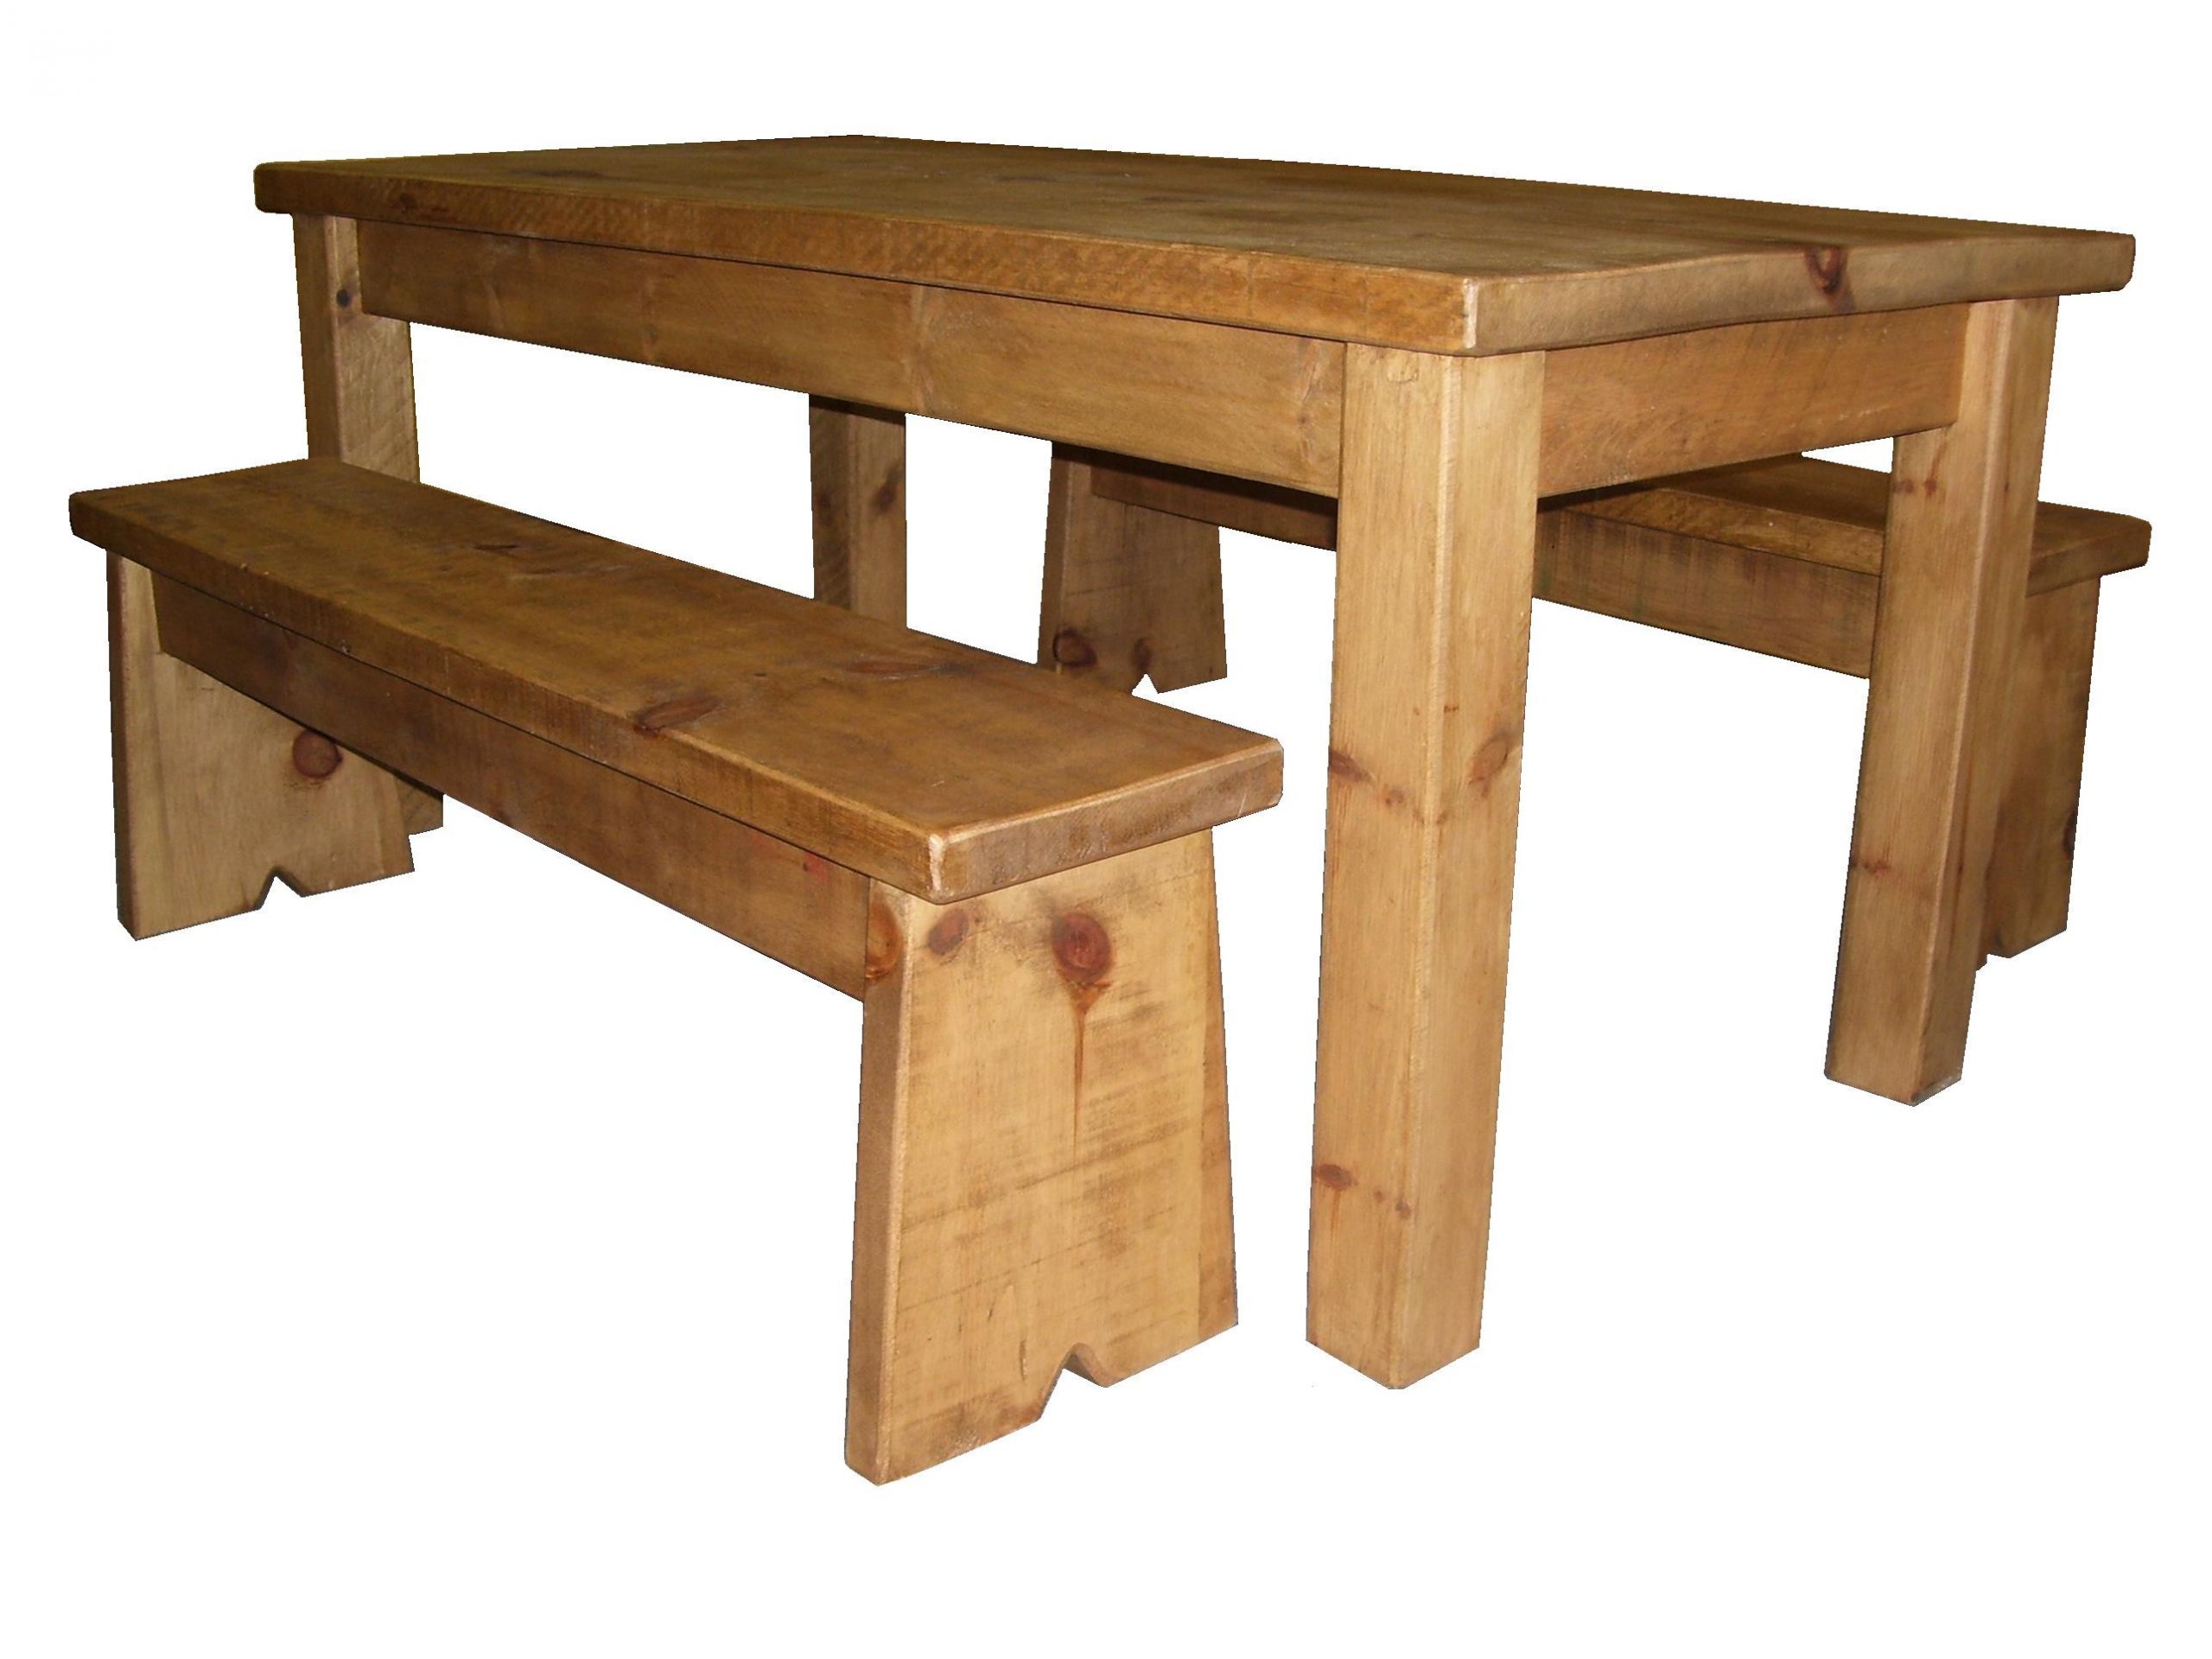 Rustic Kitchen Tables With Bench
 Rustic Pine Slab Massive Log Dining Table With Bench Set